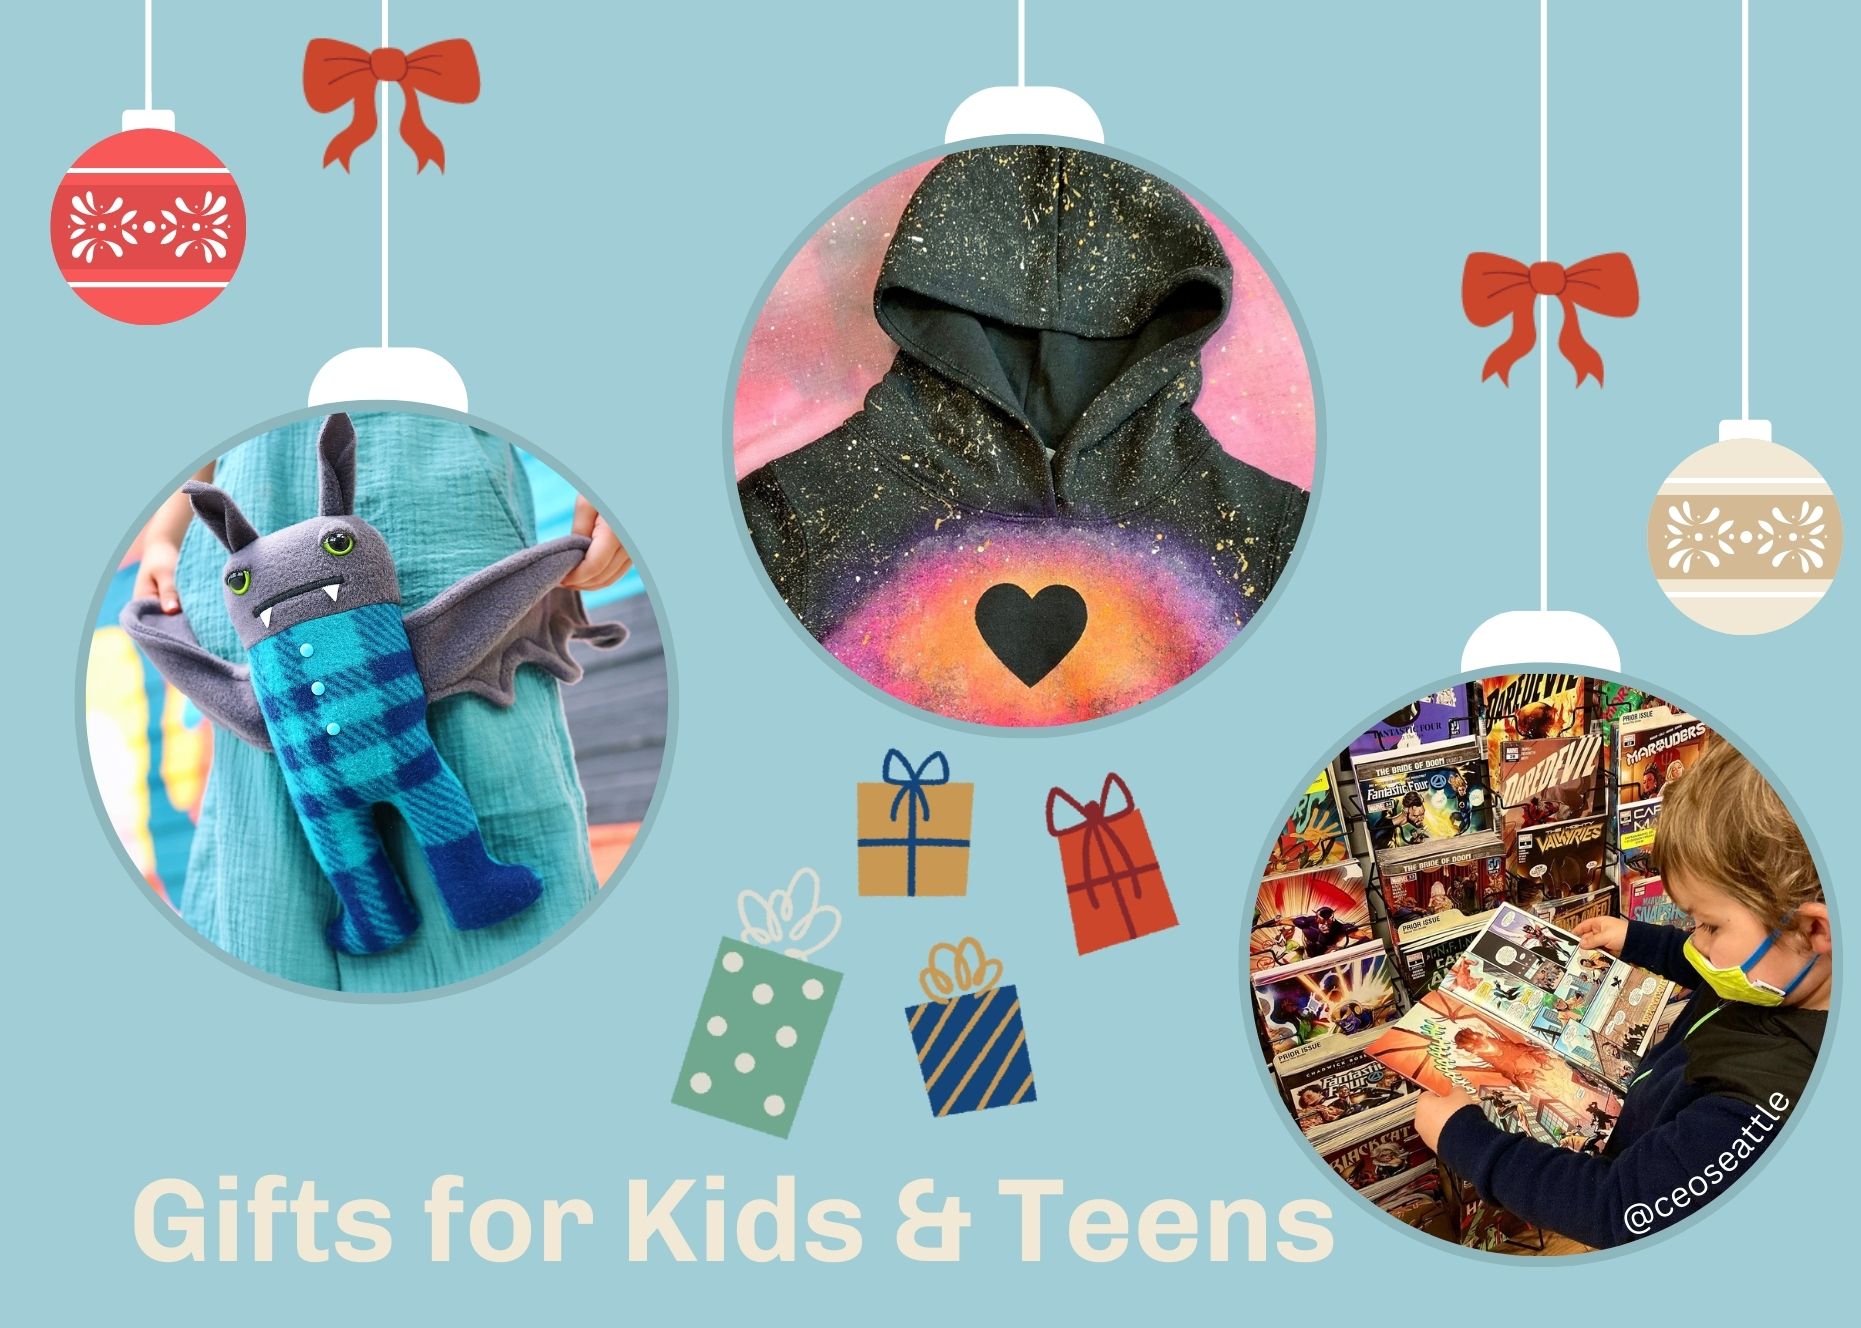 12 Gifts for Kids and Teens at Pike Place Market - Pike Place Market